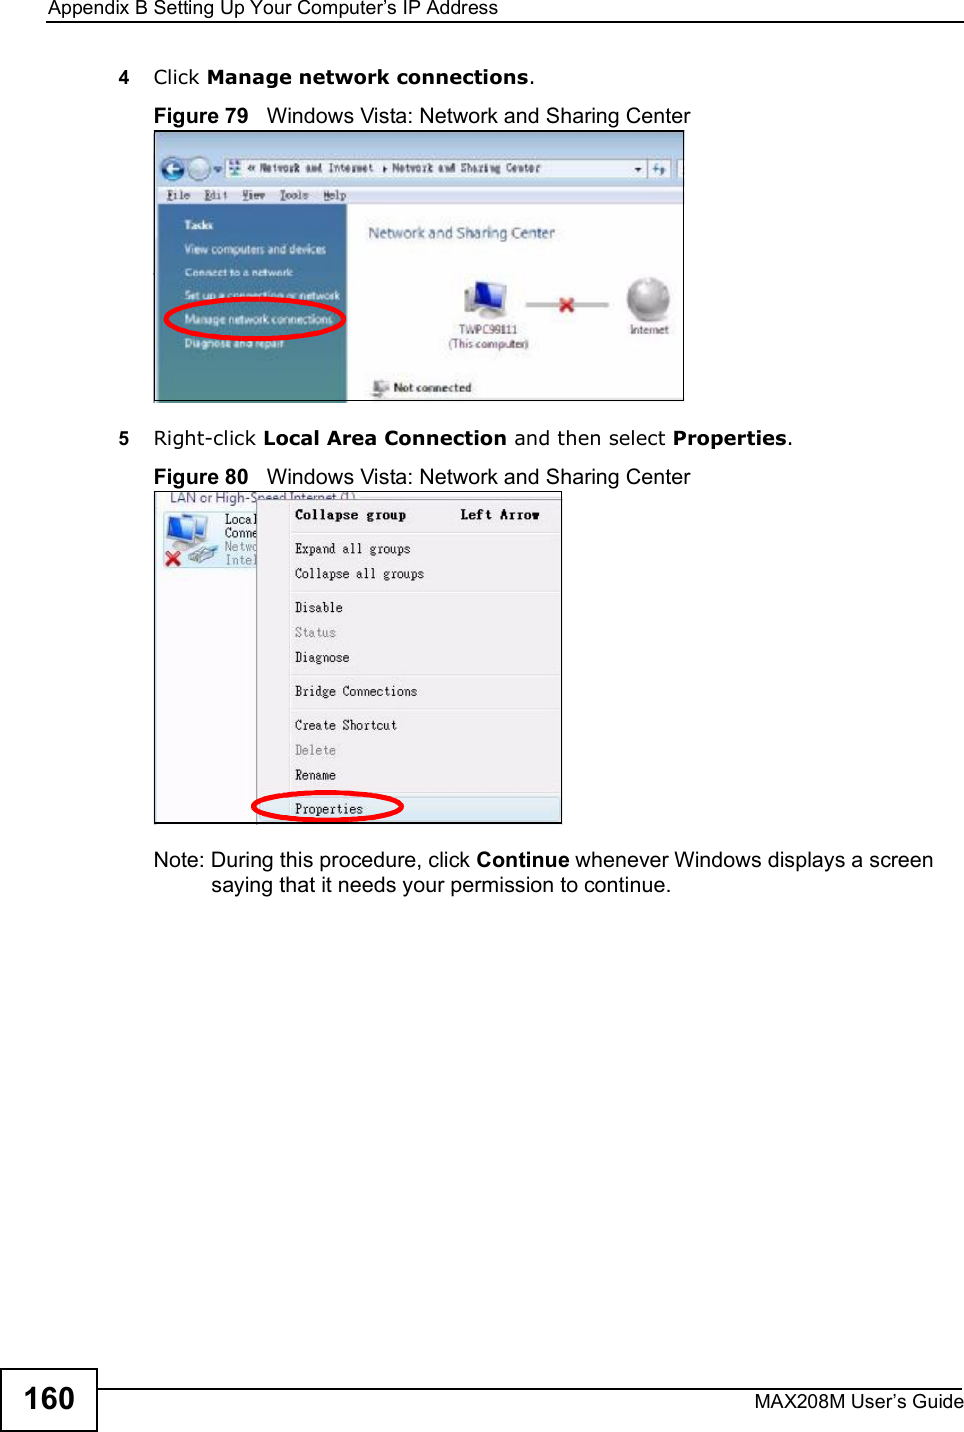 Appendix BSetting Up Your Computer s IP AddressMAX208M User s Guide1604Click Manage network connections.Figure 79   Windows Vista: Network and Sharing Center5Right-click Local Area Connection and then select Properties.Figure 80   Windows Vista: Network and Sharing CenterNote: During this procedure, click Continue whenever Windows displays a screen saying that it needs your permission to continue.